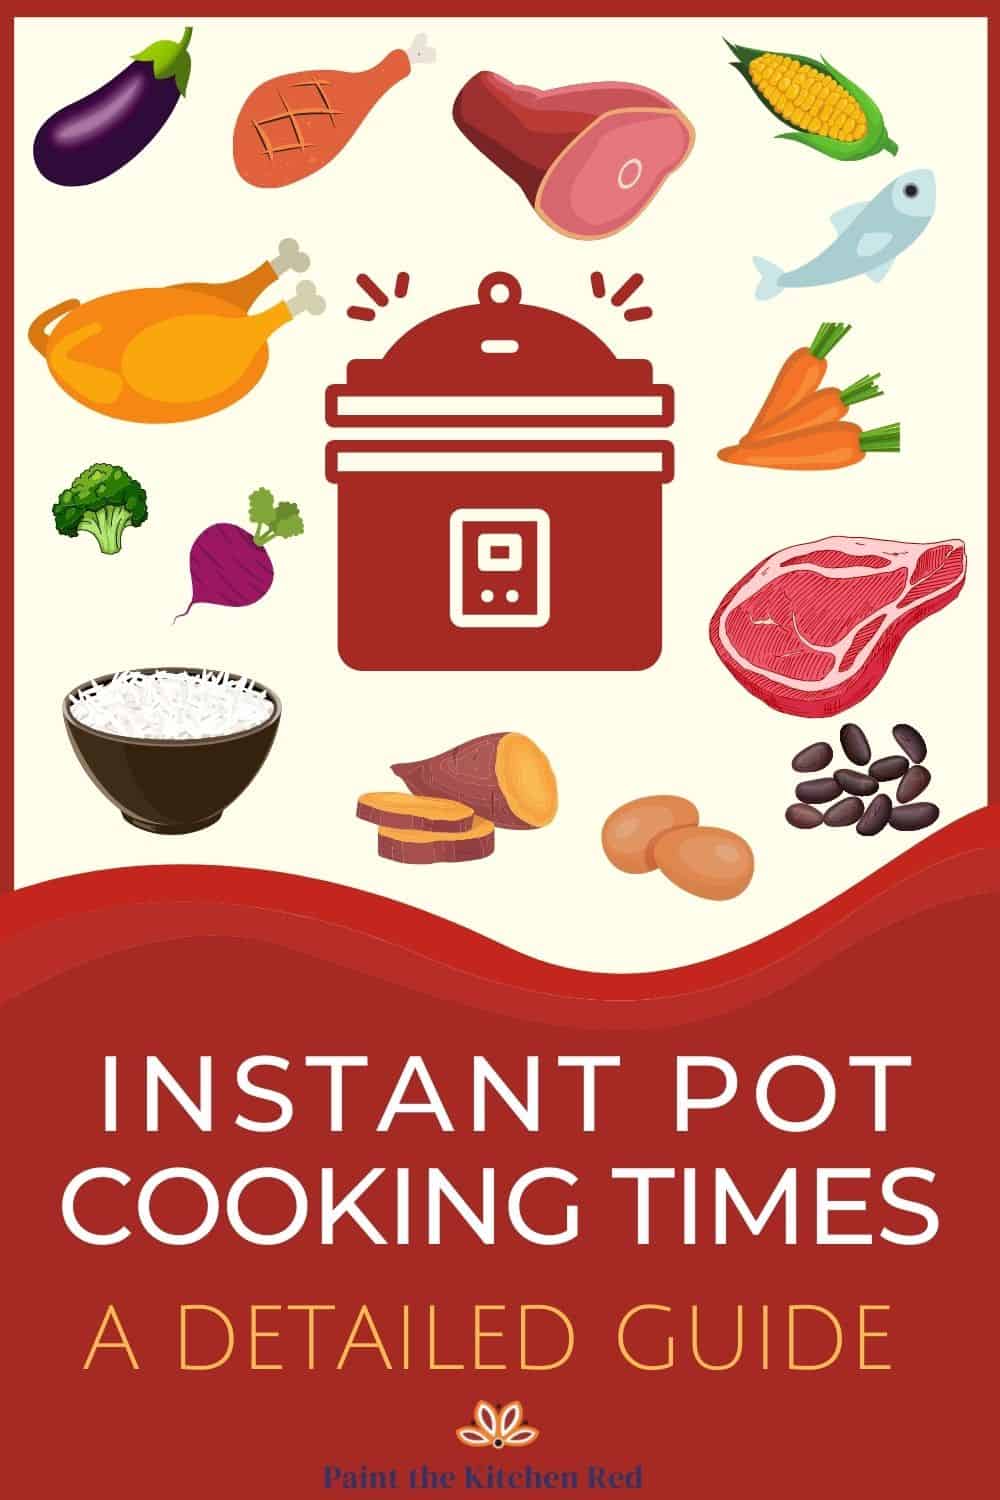 Instant Pot Cooking Times - a detailed guide with images of different foods e.g. eggplant, chicken leg, ham shank, corn.